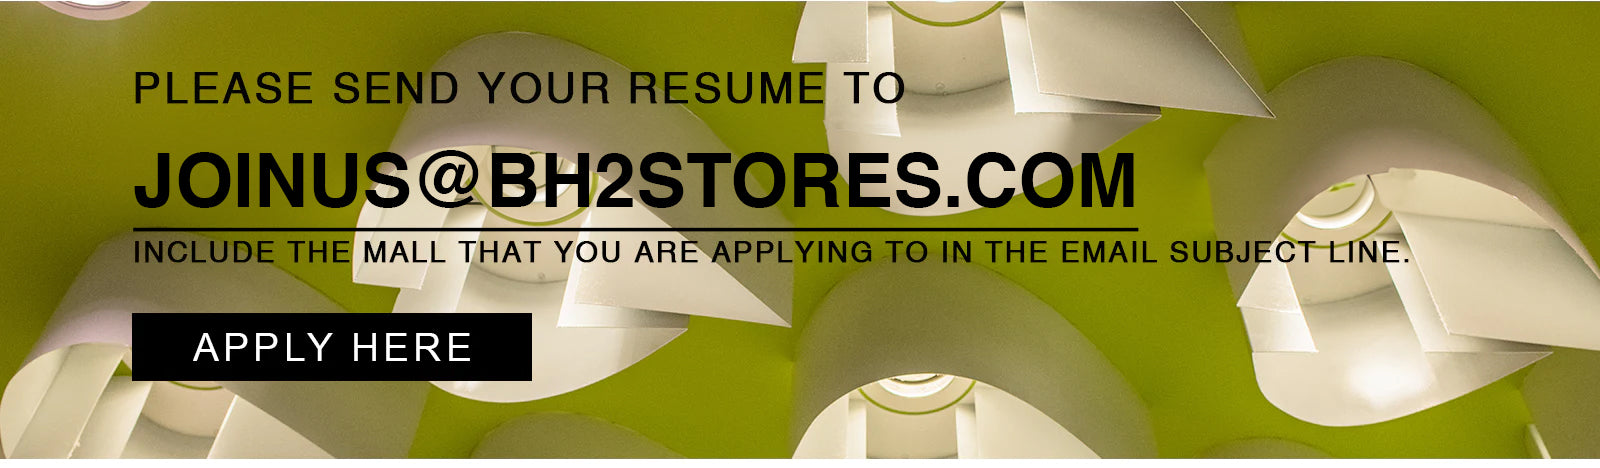 APPLY HERE - PLEASE SEND YOUR RESUME TO JOINUS@BOATHOUSESTORES.COM INCLUDE THE MALL THAT YOU ARE APPLYING TO IN THE EMAIL SUBJECT LINE.